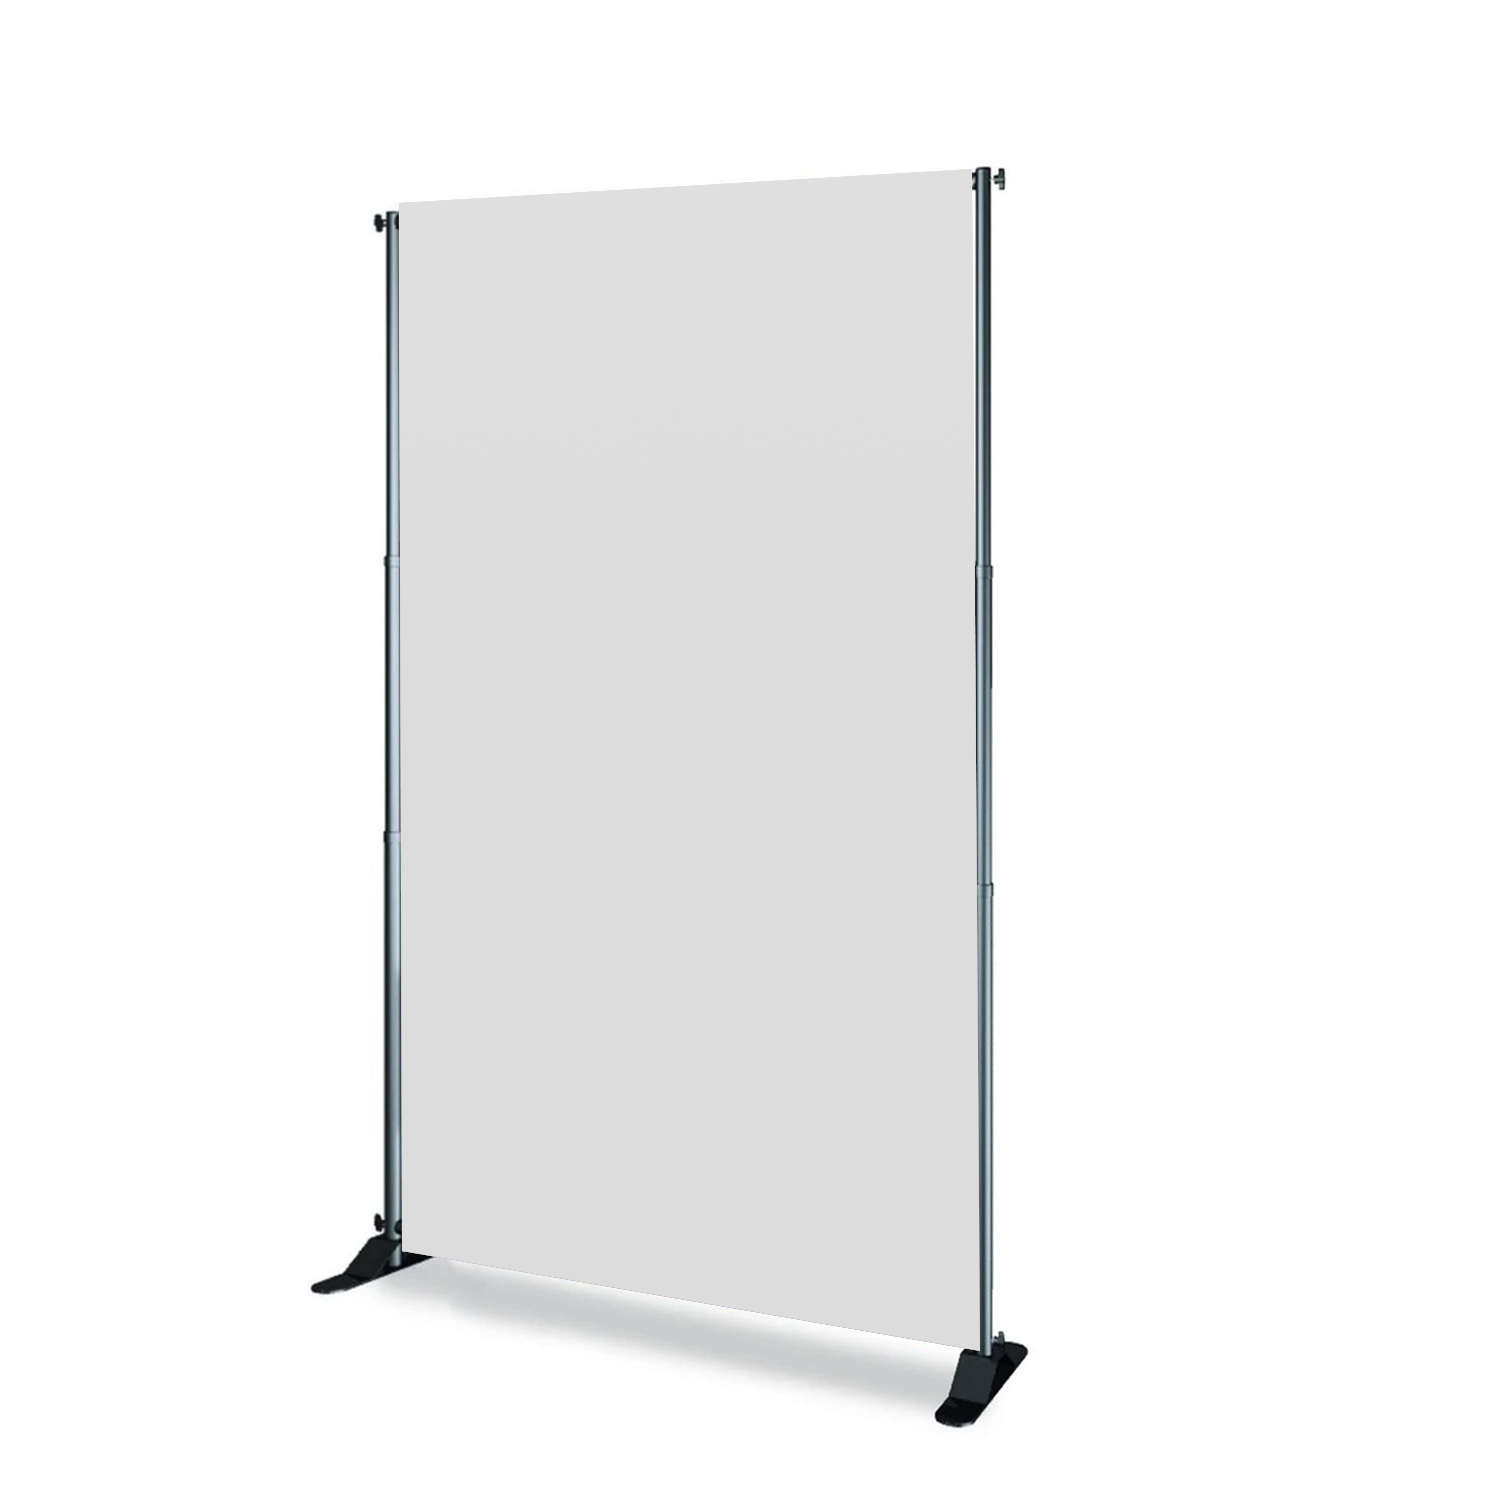 5'x8' Backdrop Replacement Graphic Banner Only (C/R)